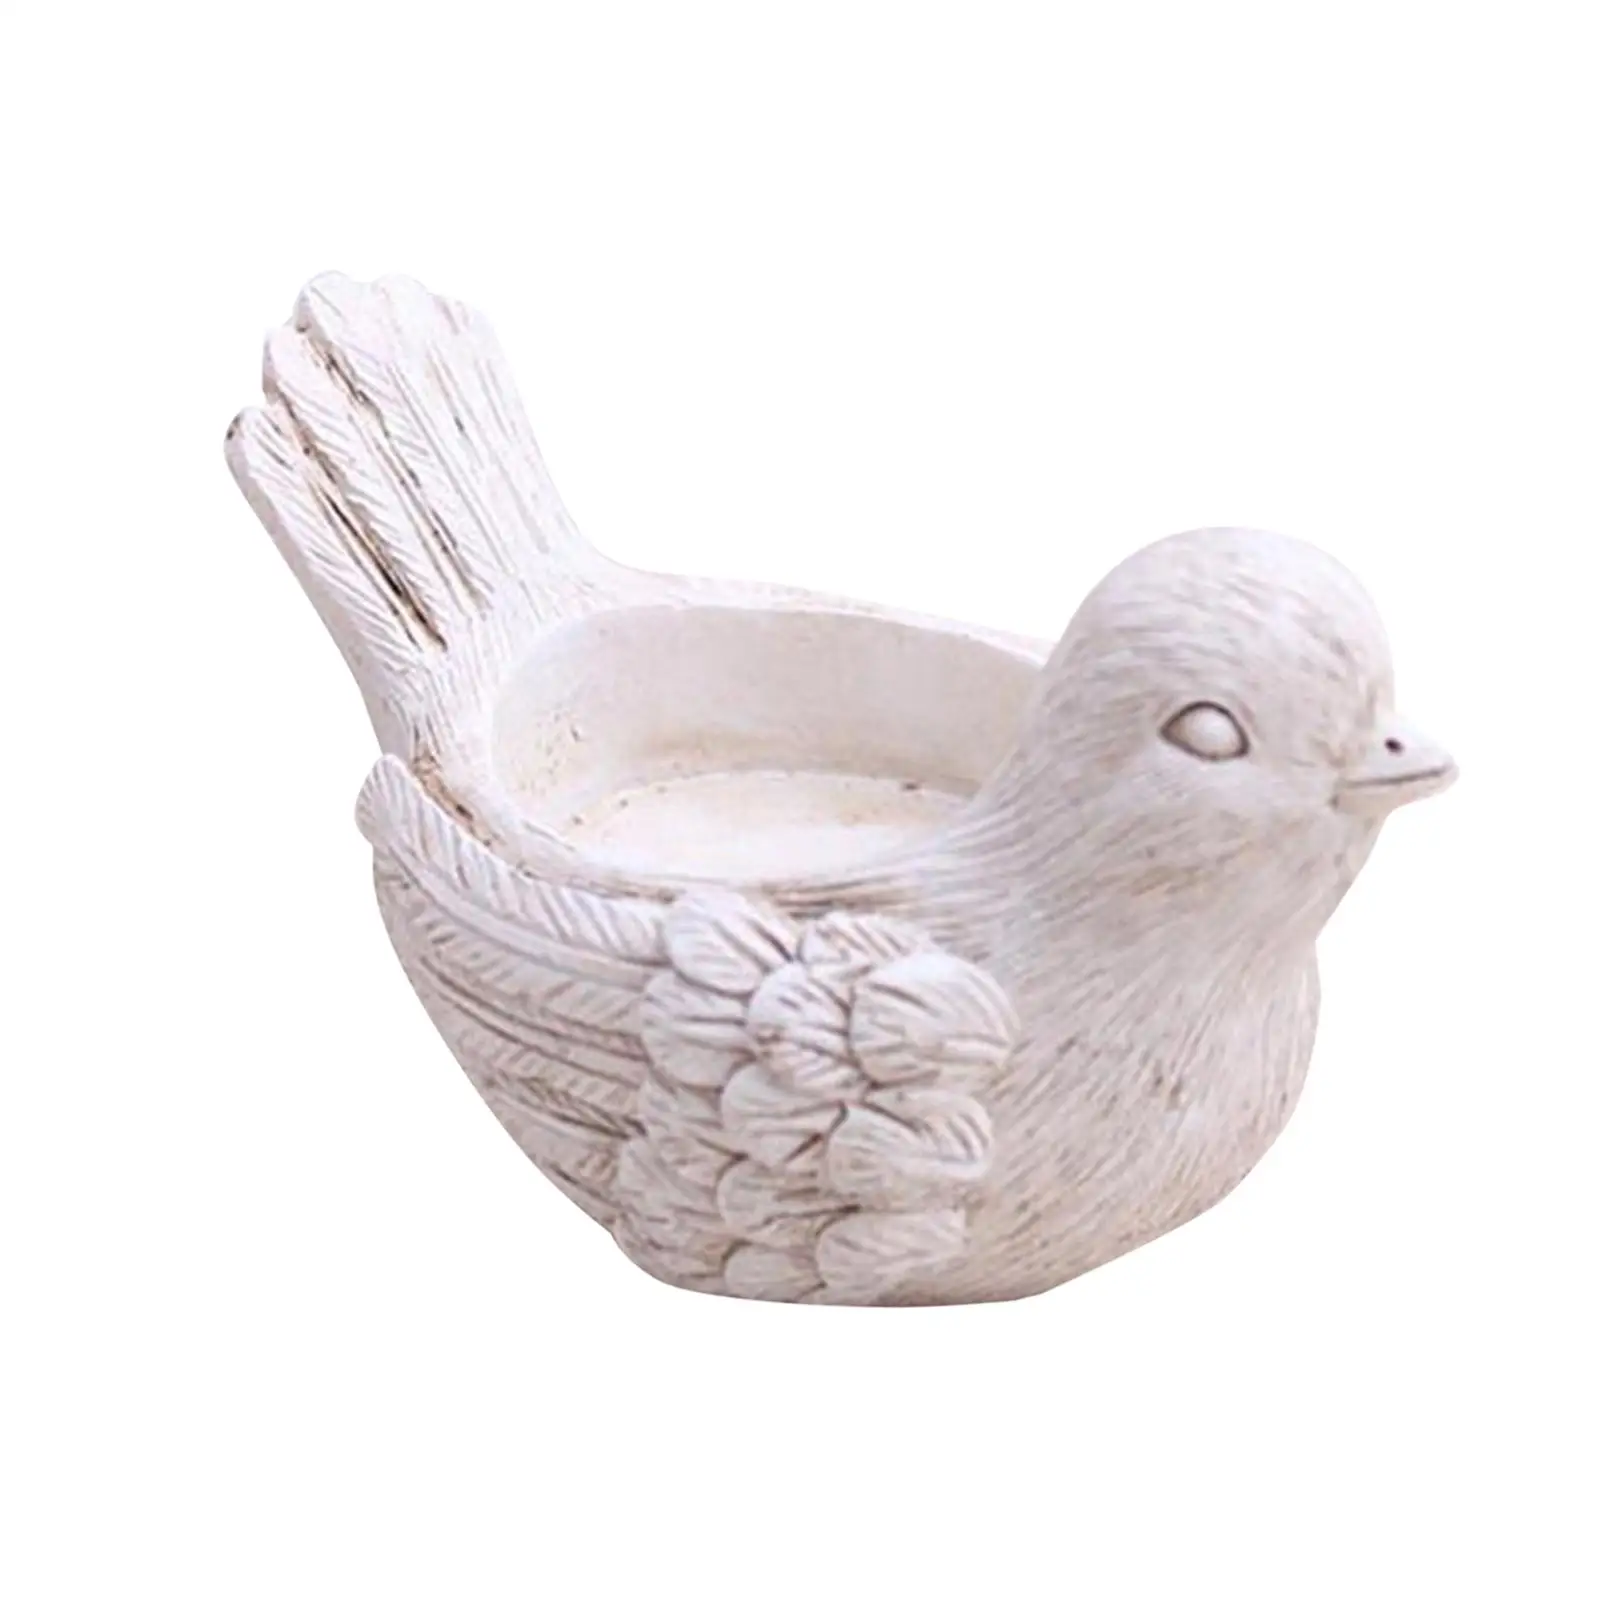 Bird Statue Candle Holder Collection for Party Dinner Table Home Decorations